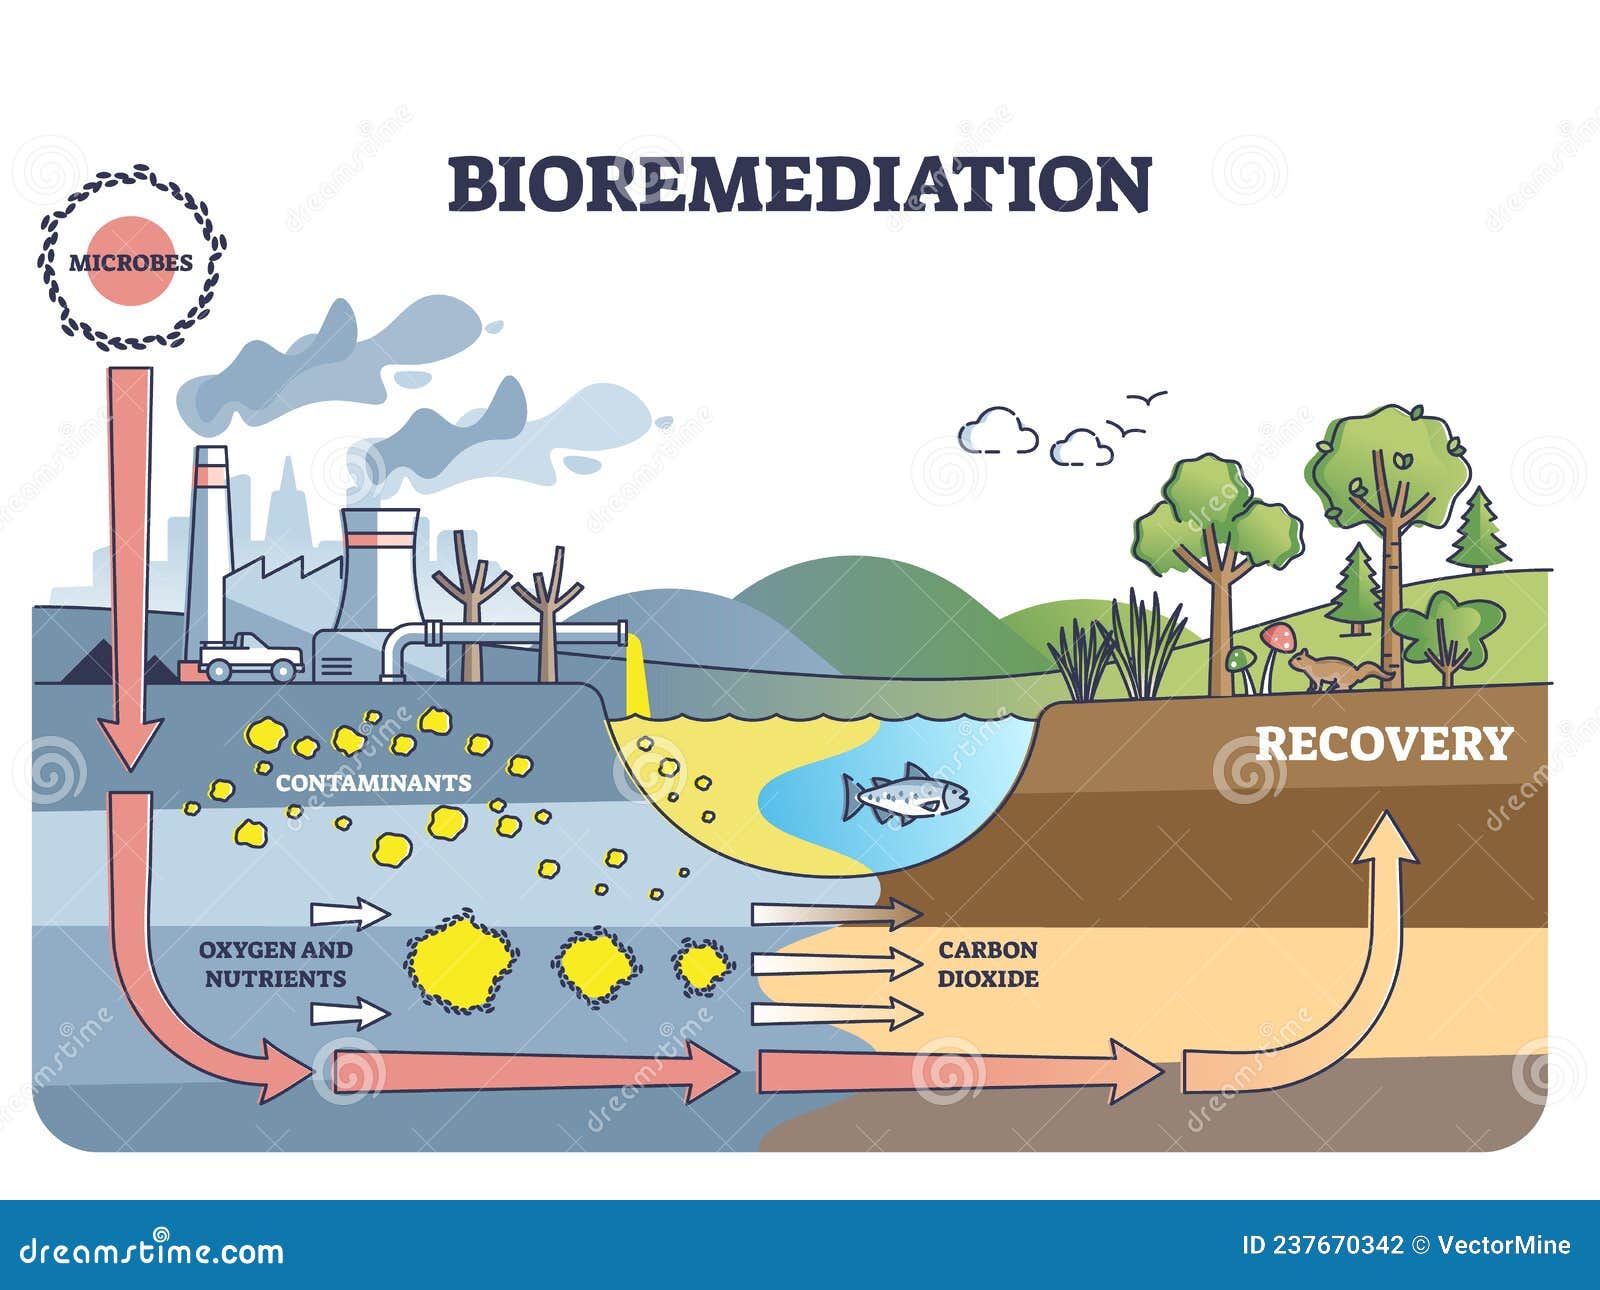 bioremediation and contaminated soil or water recovery outline diagram